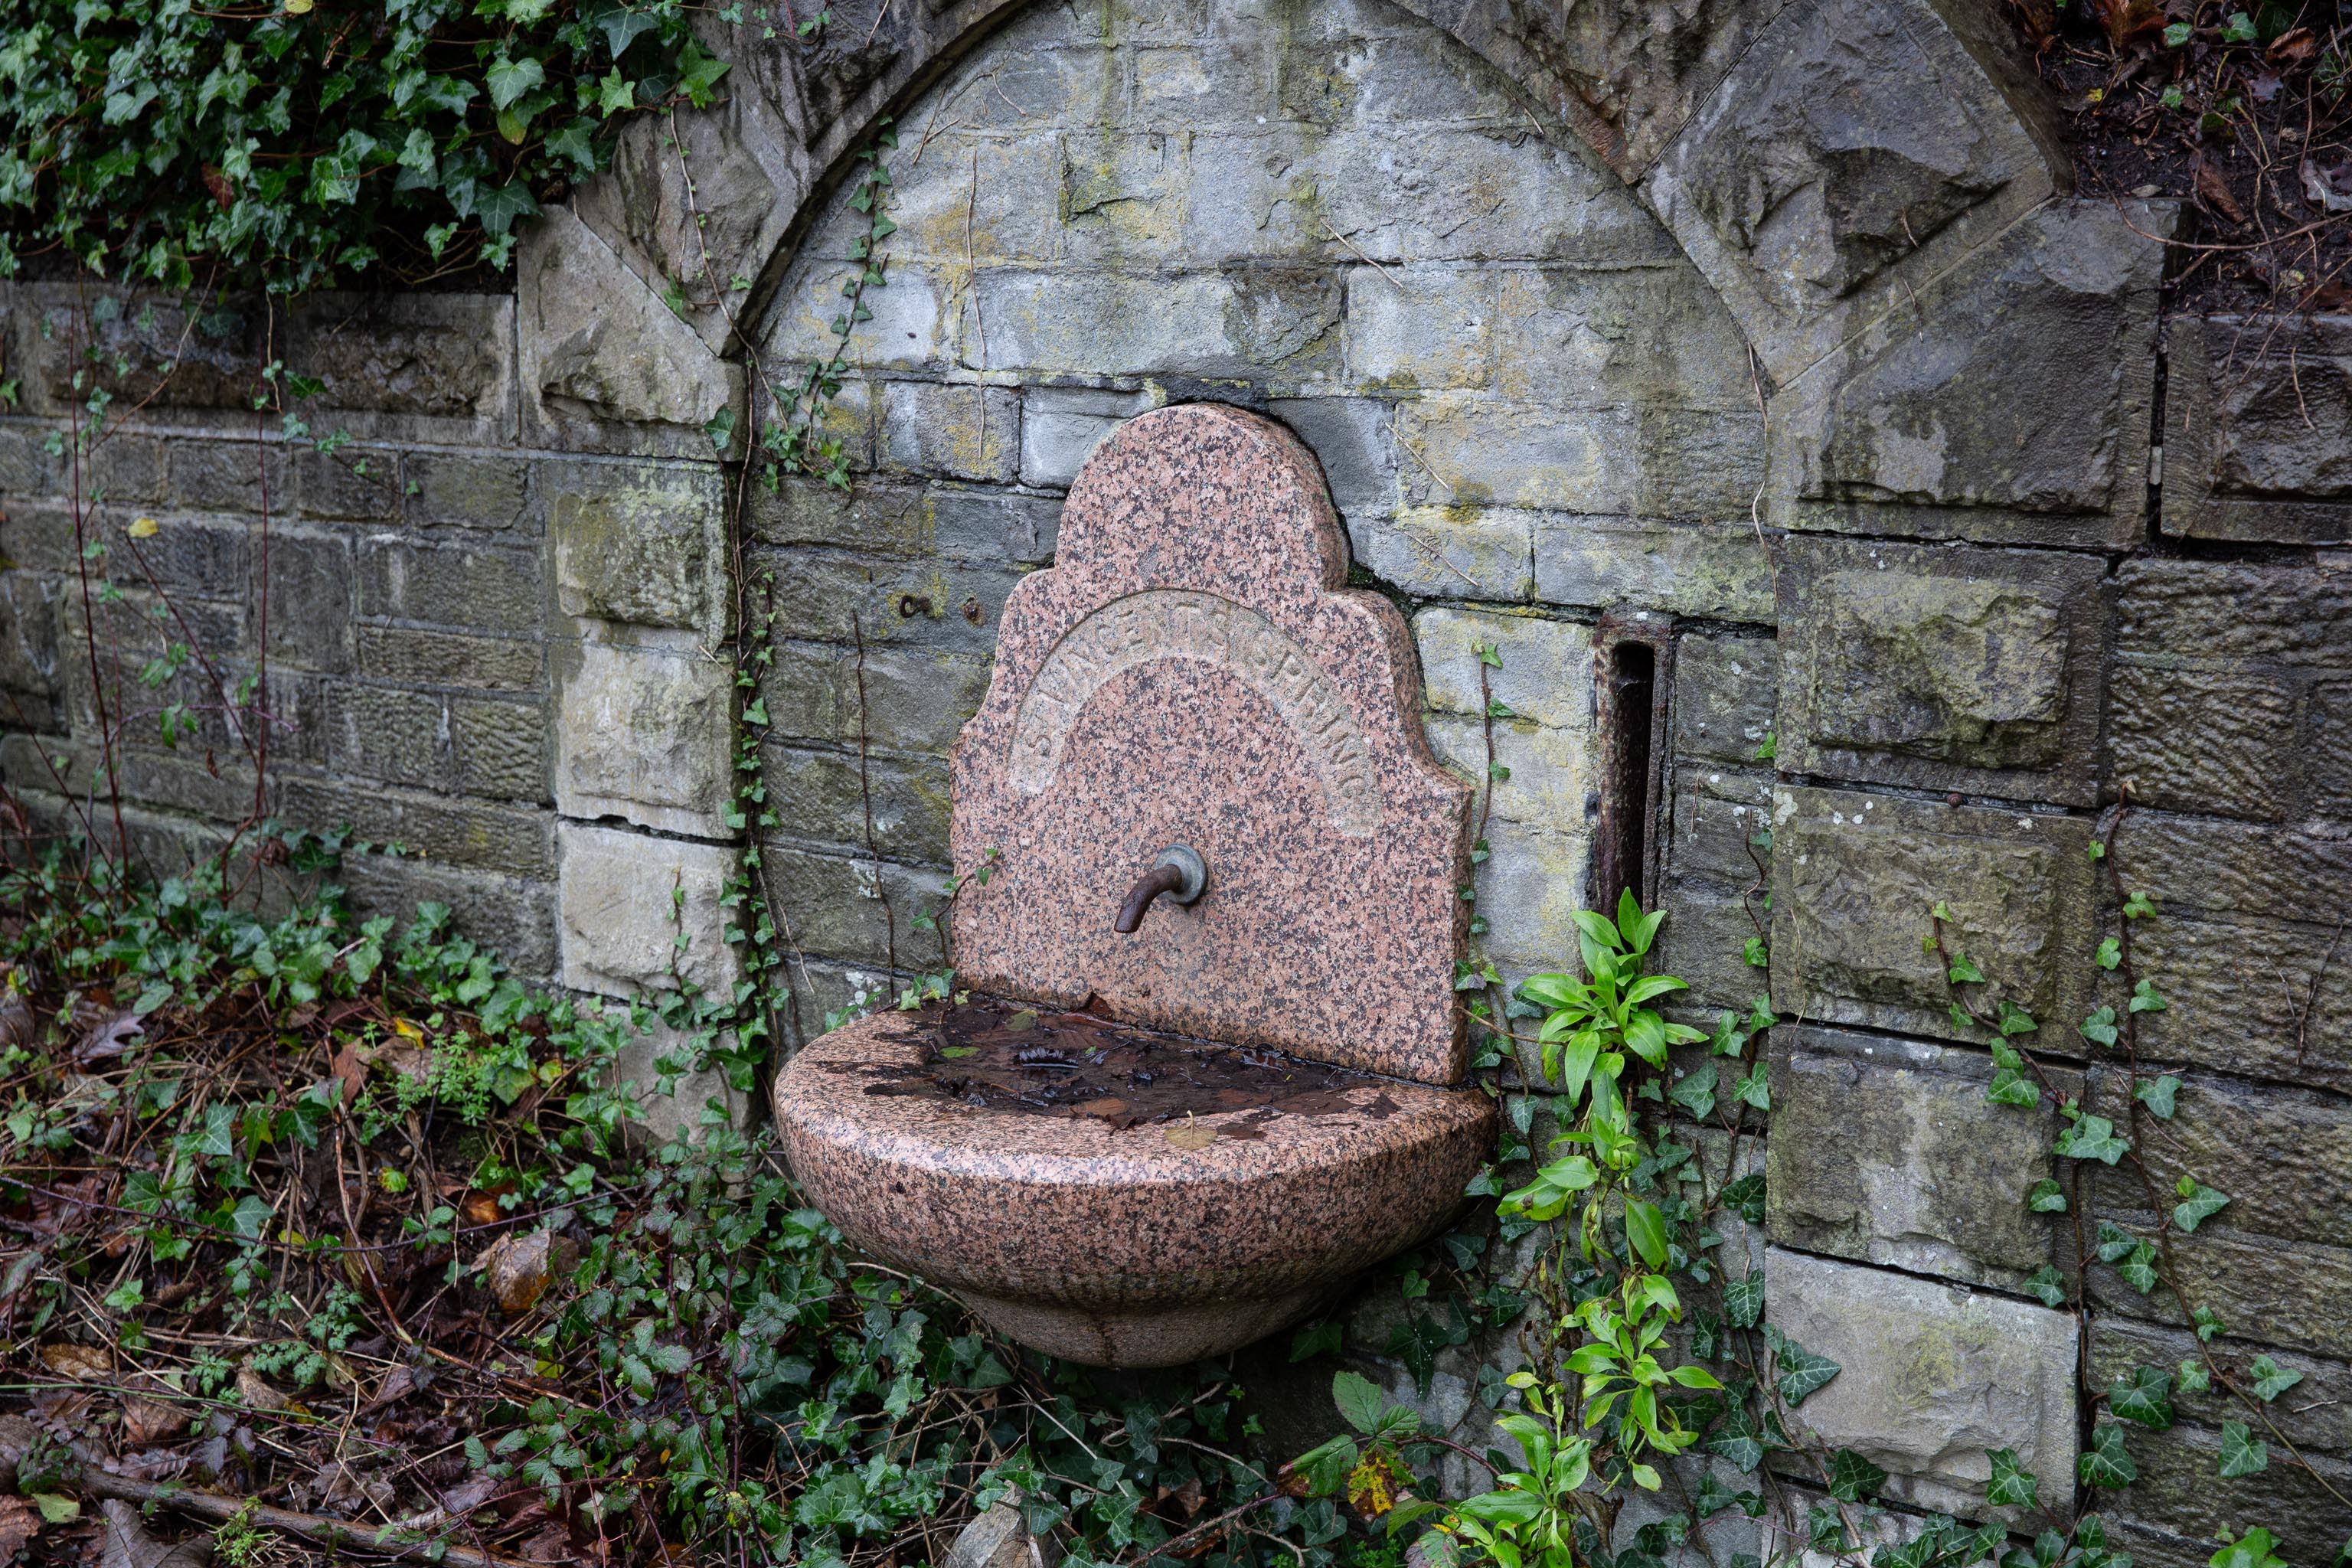 
                                St Vincent's Spring 6

                                                                    John Wesley, founder of Methodism, suffering from a "galloping consumption", found the location of St Vincent's Spring more to his taste then the m...
                                                                